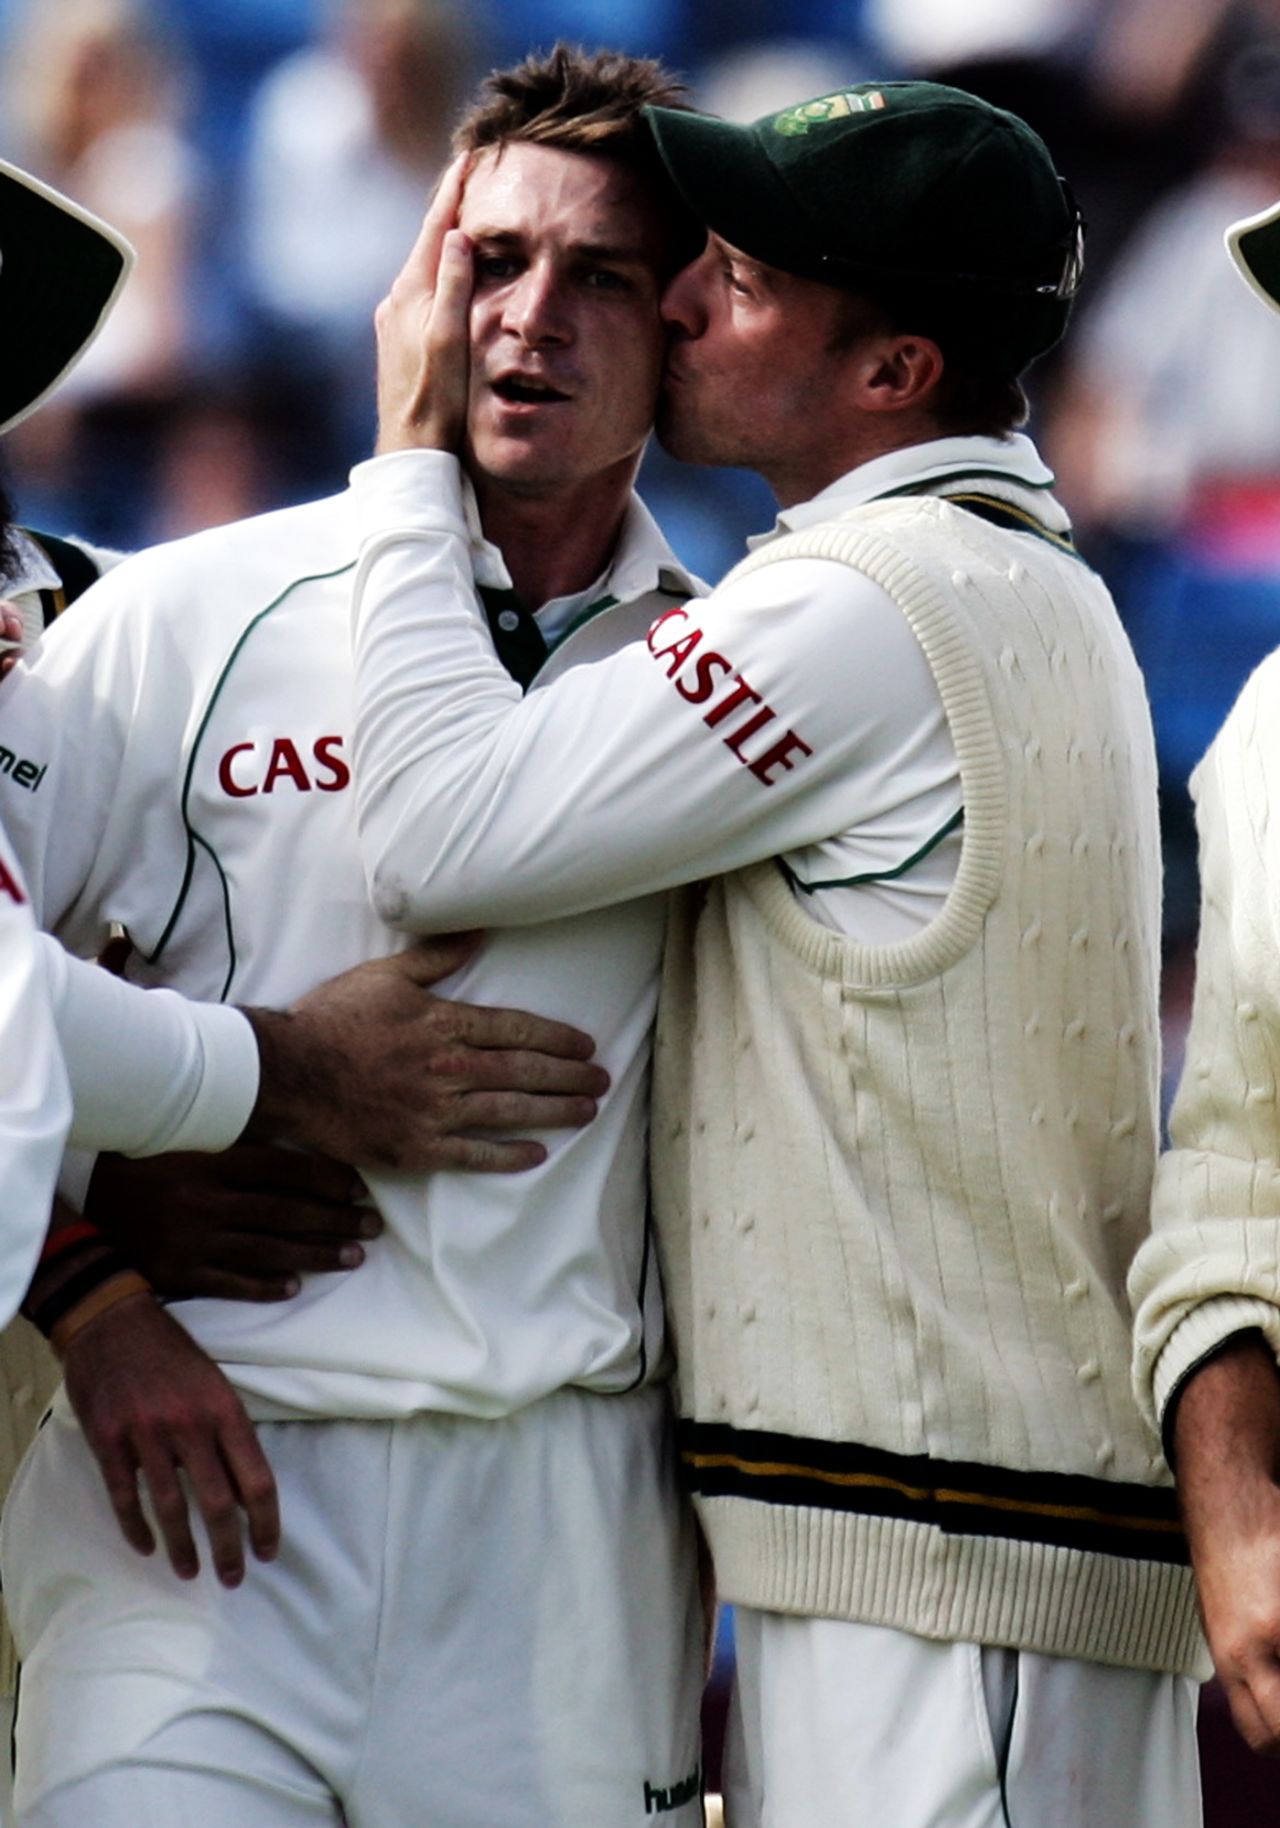 AB de Villiers kisses Dale Steyn on getting a wicket, England v South Africa, 2nd Test, Leeds, 4th day, July 21, 2008